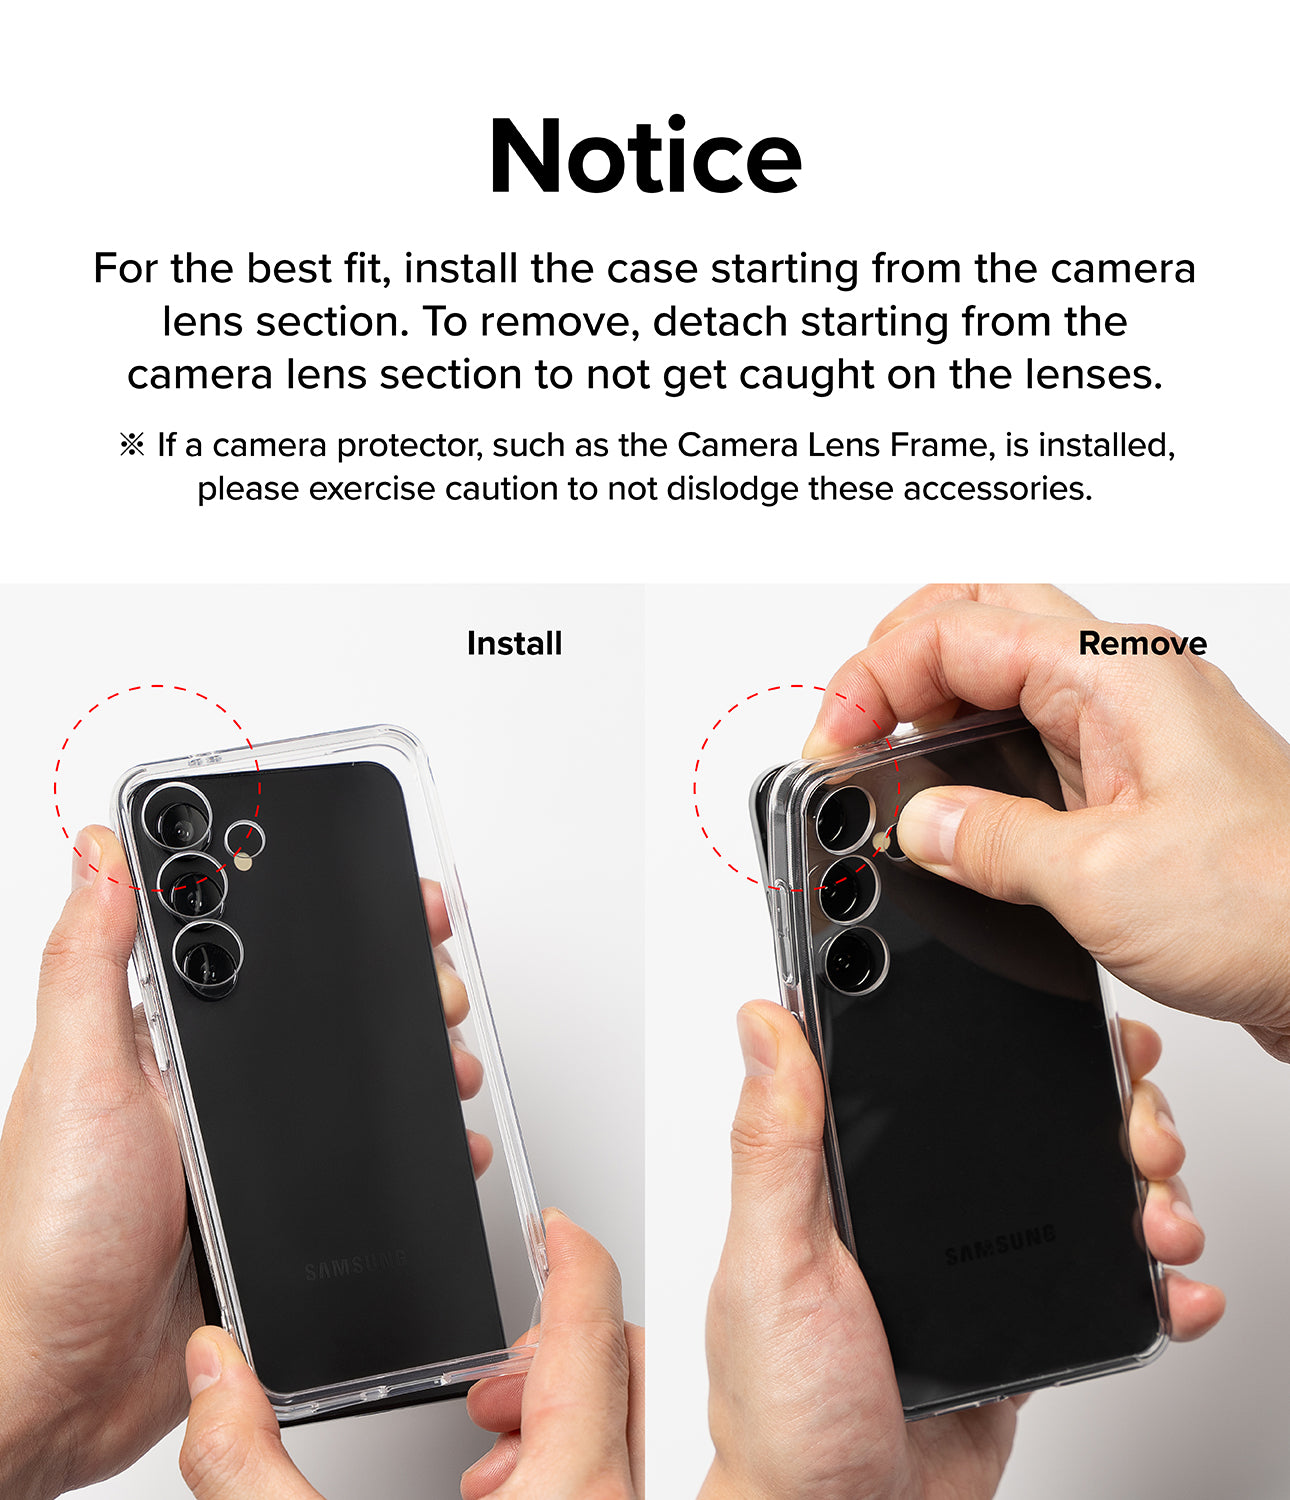 OnePlus 12R Case | Fusion-X Camo Black - Notice. For the best fit, install the case starting from the camera lens section. To remove, detach starting from the camera lens section to not get caught on the lenses.